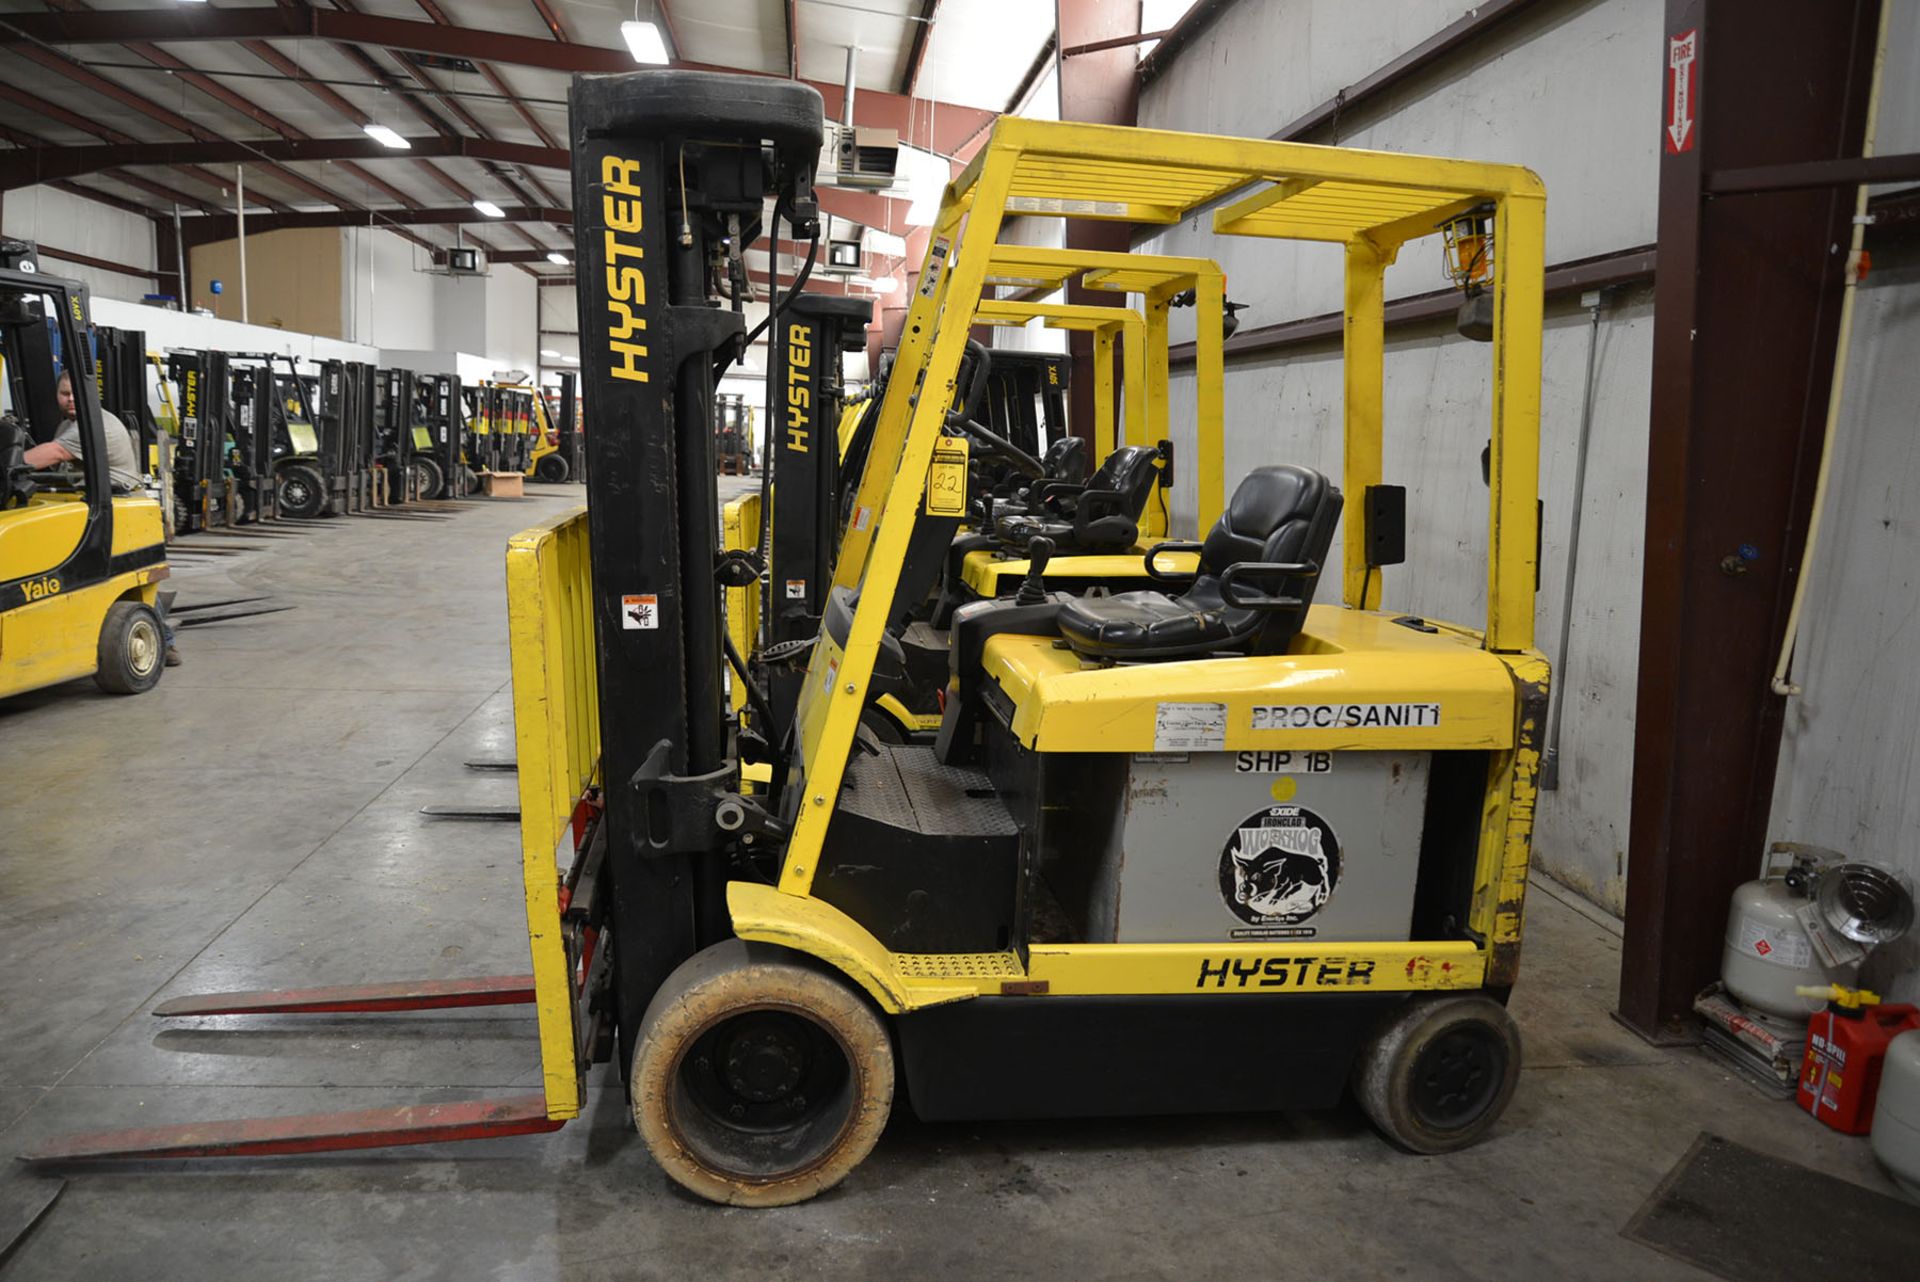 2003 HYSTER 6,500-LB., MODEL: E65XM2-40, SN: F108V27487A, 36V ELECTRIC, SOLID NON-MARKING TIRES, 4-